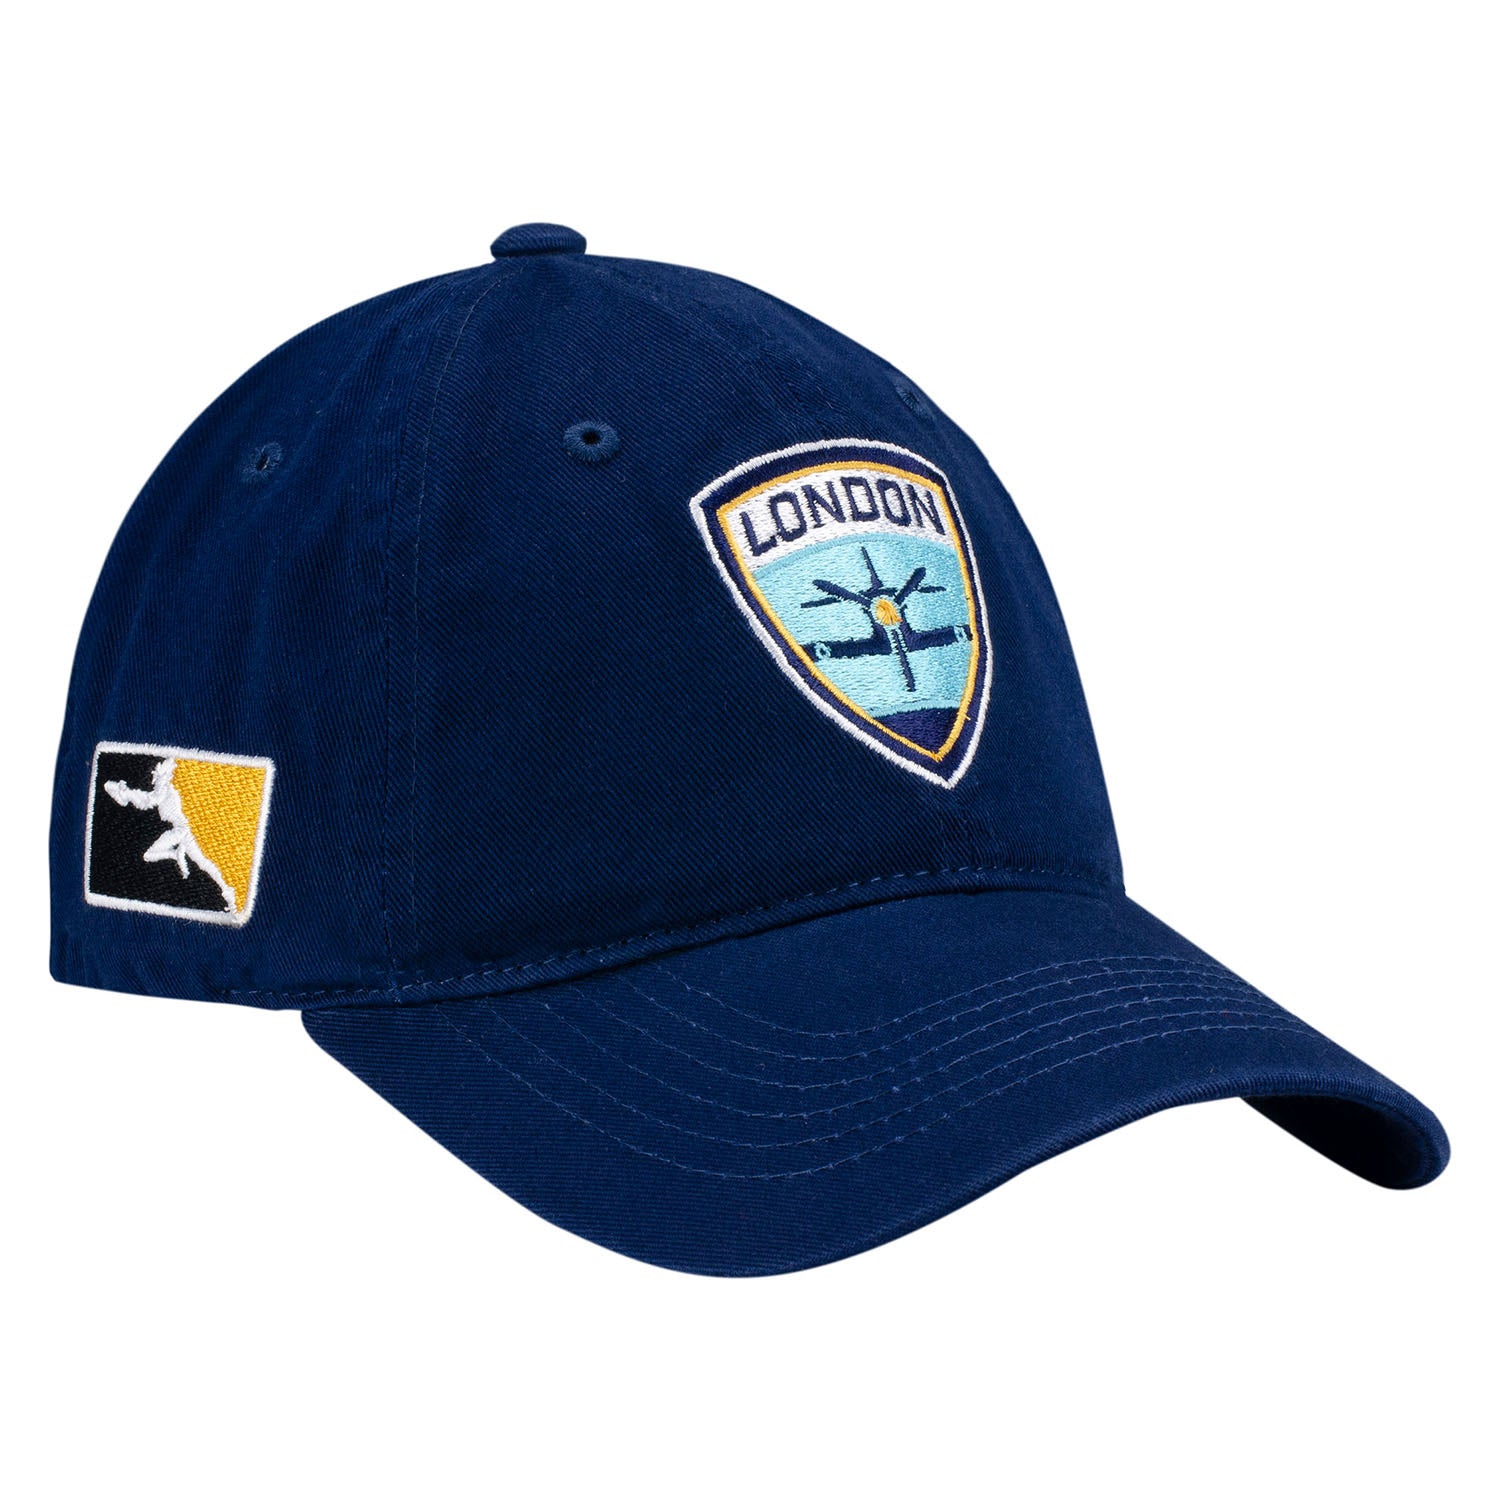 London Spitfire Blue Dad Hat - Right View